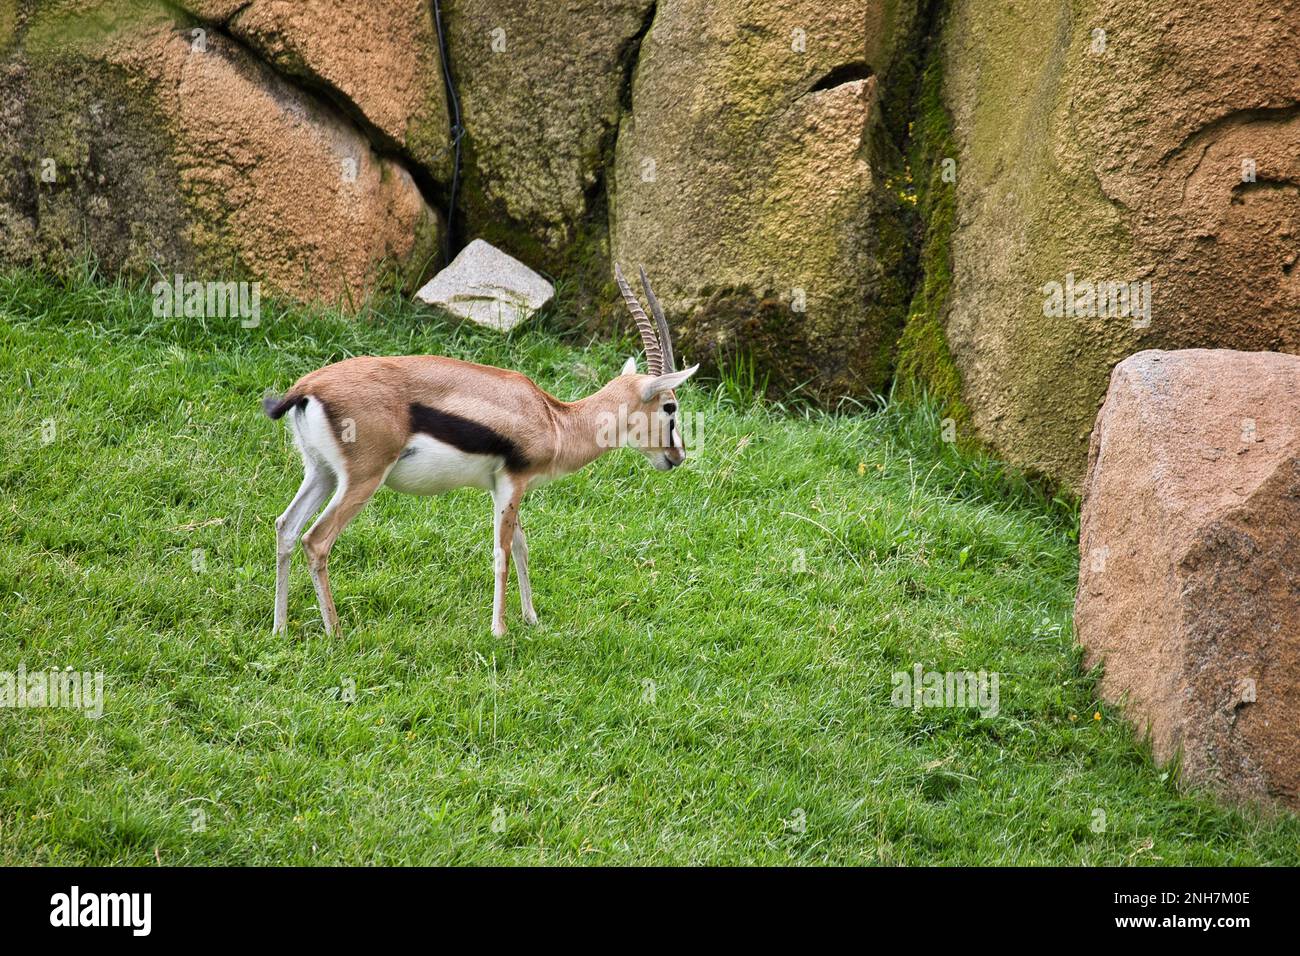 Full body shot of a gazelle in a grassy landscape with a rock wall in the background. Stock Photo